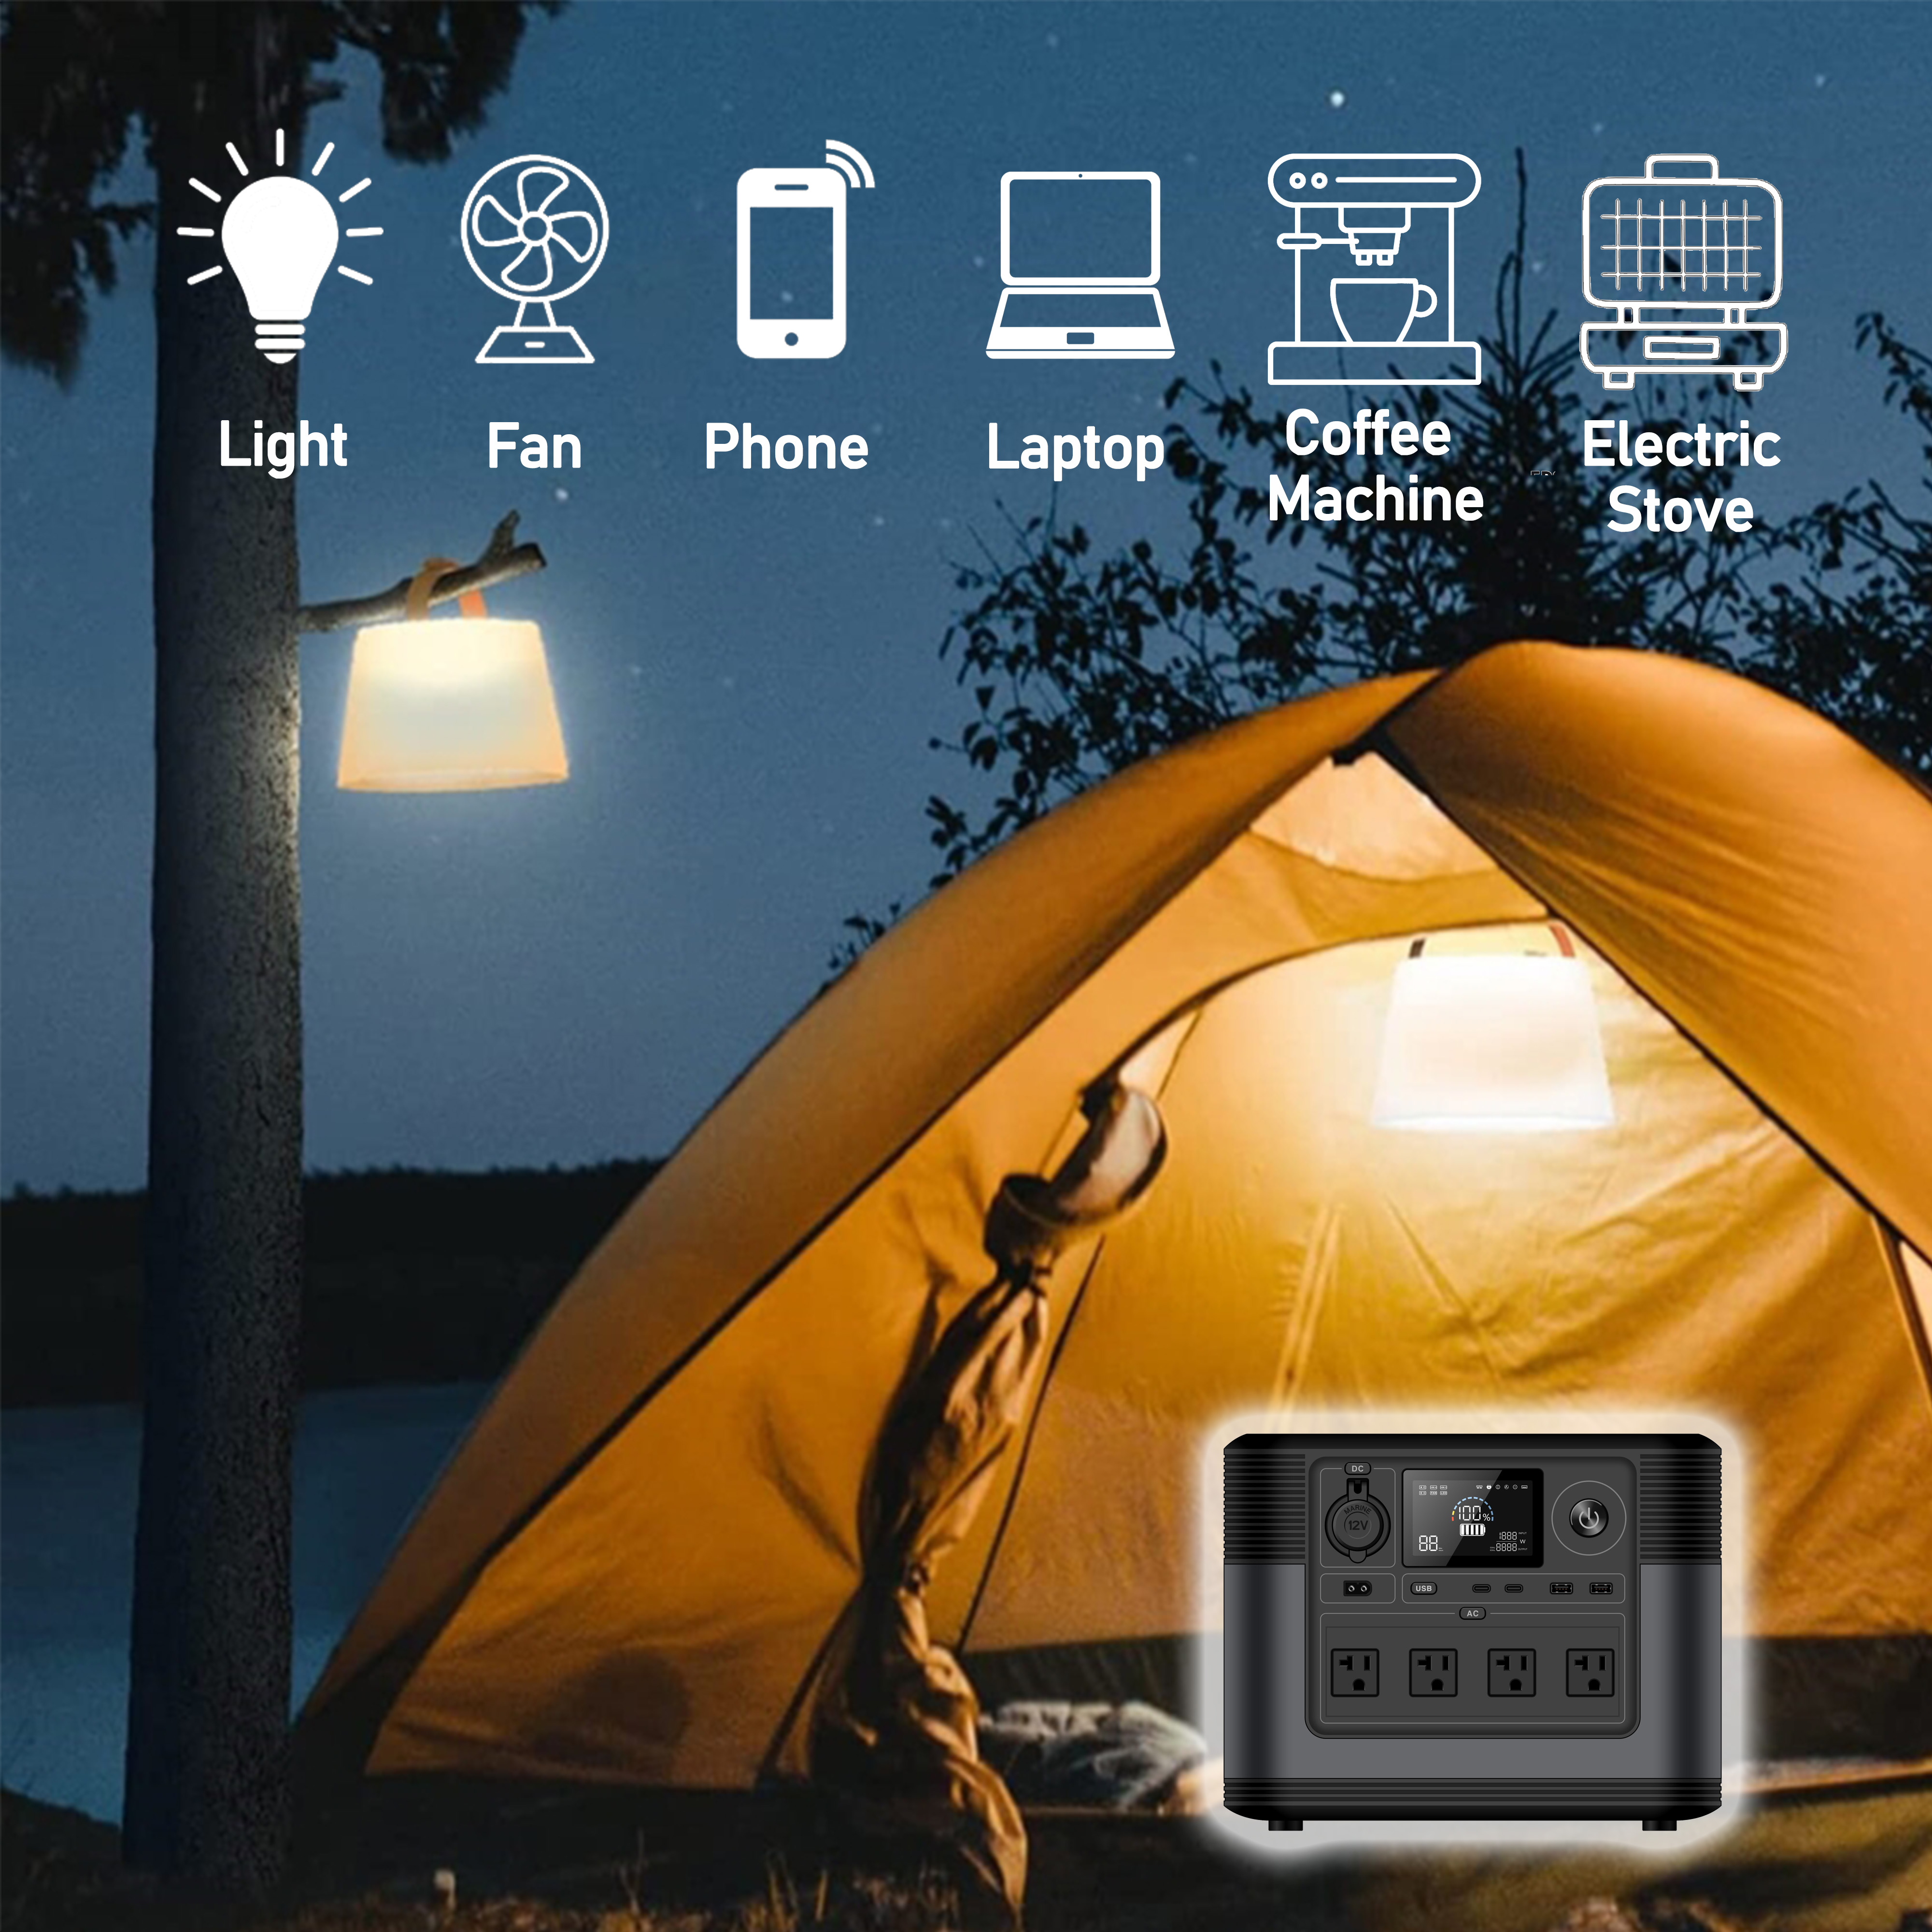 Portable Power Station for Camping RV Boat Solar Inverter Controller ALL in One